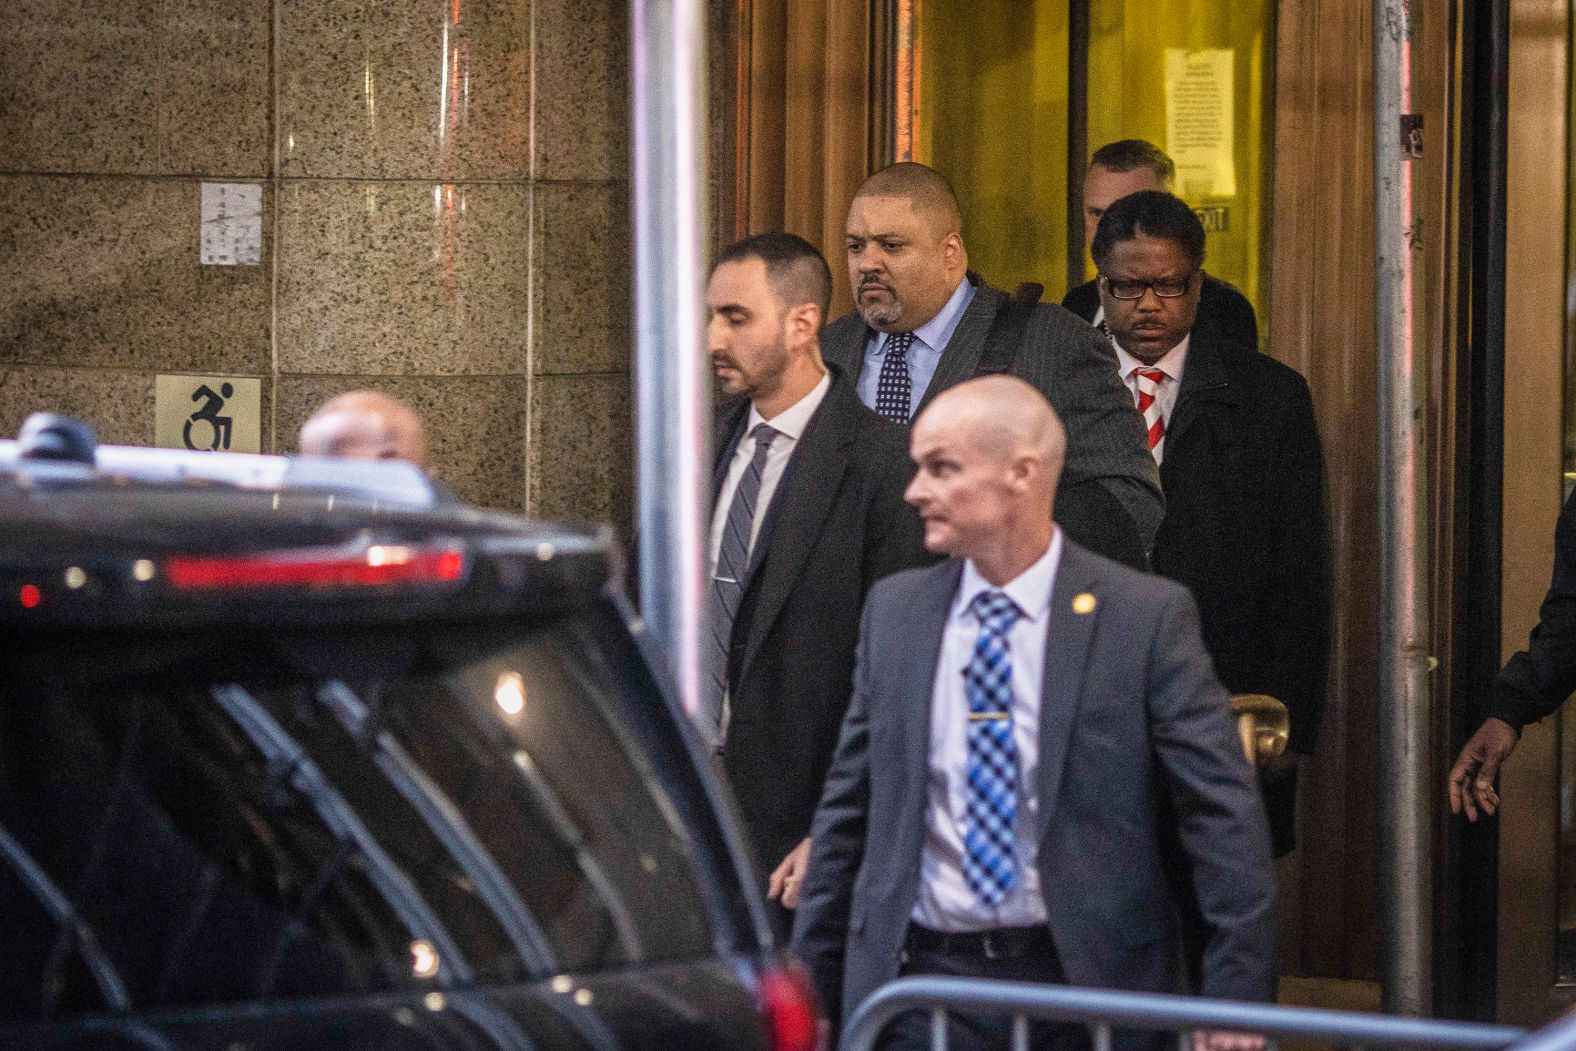 Bragg leaves the Manhattan Criminal Courthouse after the grand jury indicted Trump on March 30. The Manhattan district attorney had remained tight-lipped on the details of the Trump probe, which he inherited from his predecessor, Cy Vance, who began the investigation when Trump was still in the White House.